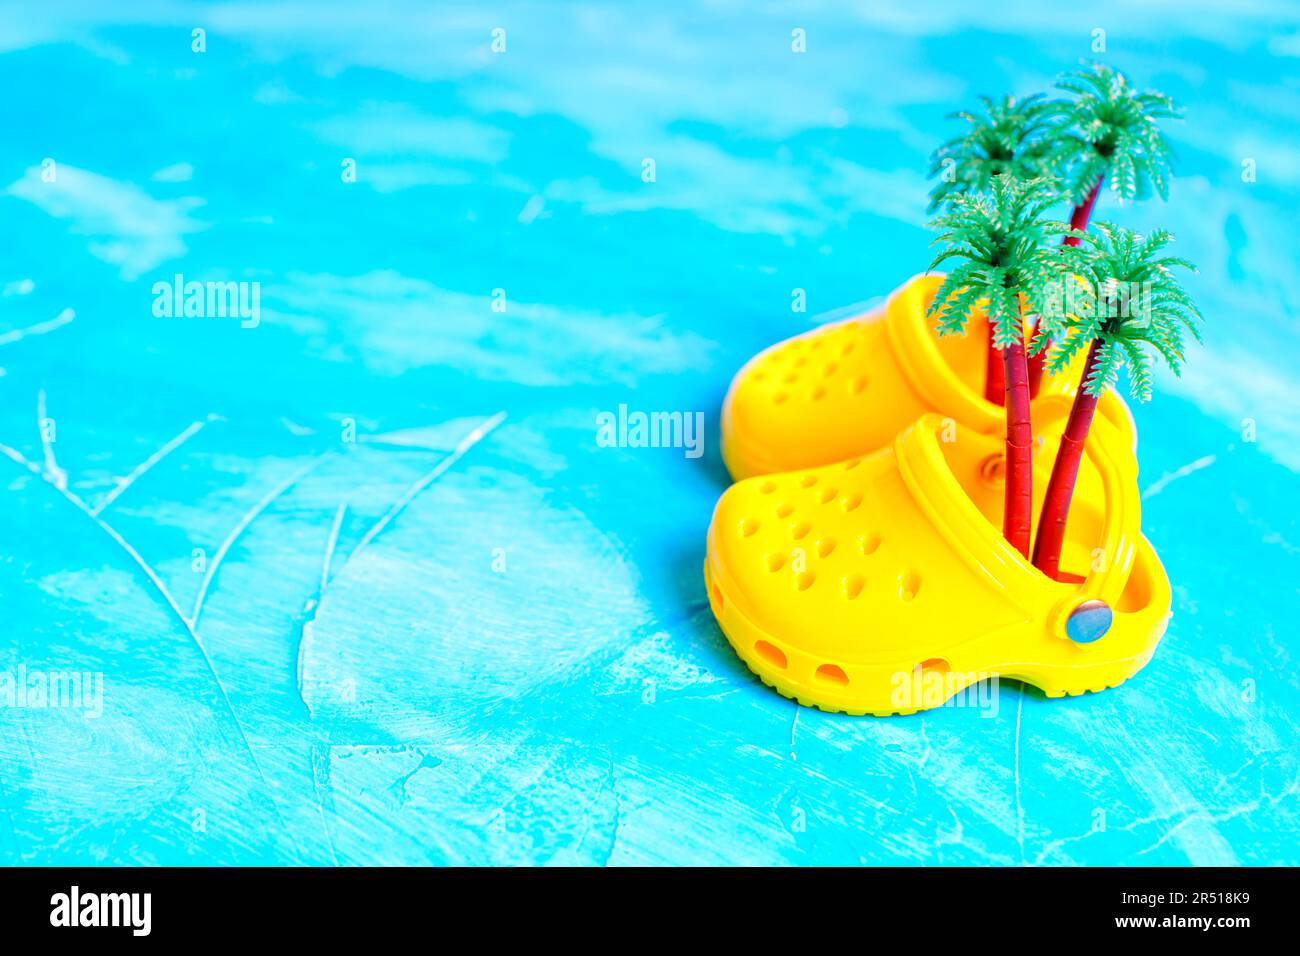 Tiny perforated yellow clogs with toy palm trees isolated on a blue background. Vivid beachwear promotions and summer footwear concept. Stock Photo